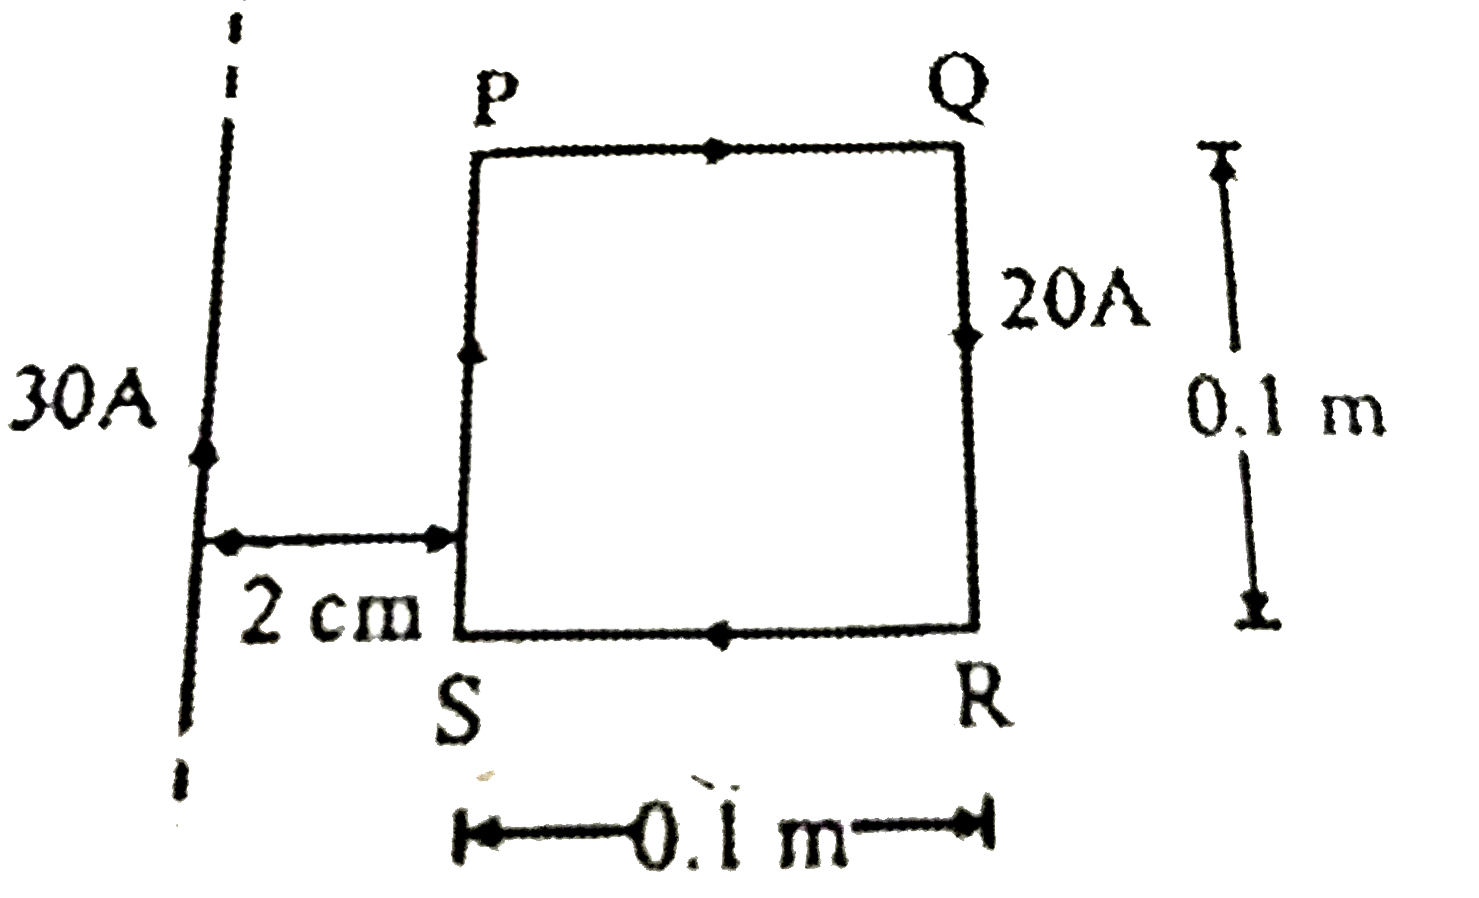 The resultant force on a square current loop PQRS due to a long current carrying conductor will be (if the current flow in the loop is clockwise)